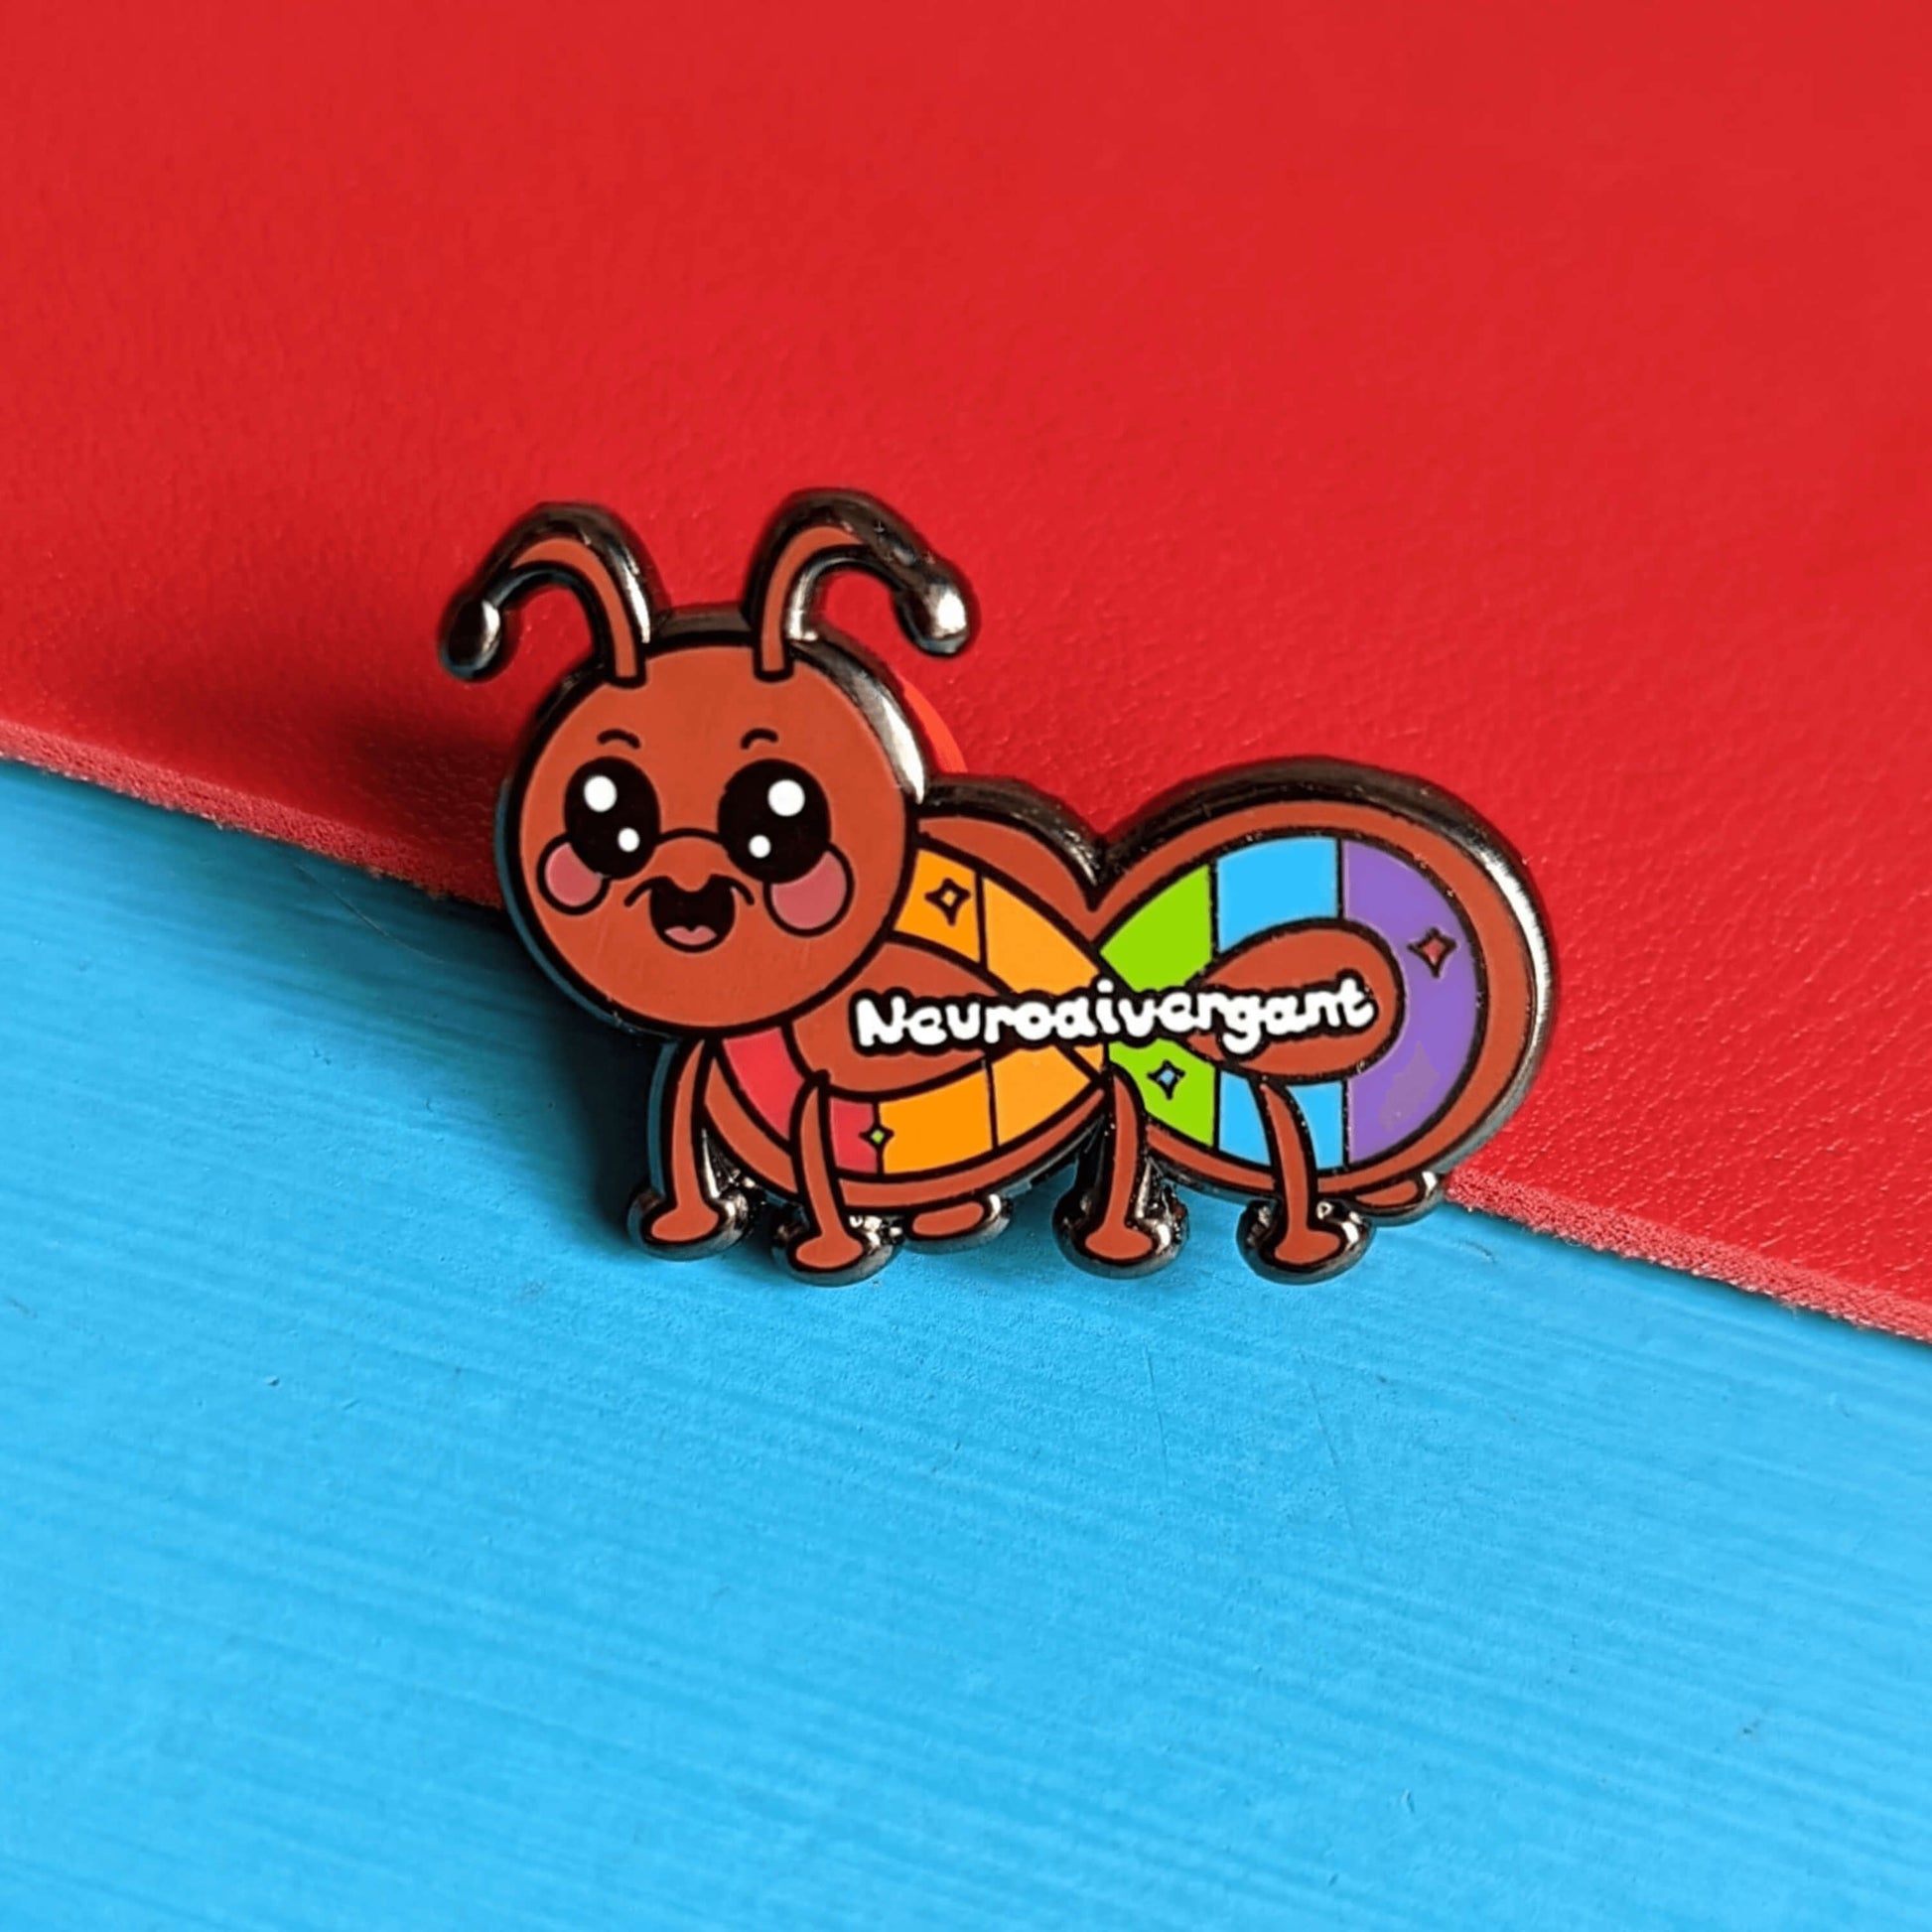 A cute brown ant enamel pin with wide sparkly eyes, rosy cheeks and antennae. The ant has it's mouth open in a smile and has the rainbow neurodivergent sign on it's body with 'neurodivergant' written in white across it. The enamel pin is shown on a red and blue background. Raising awareness for neurodivergence.